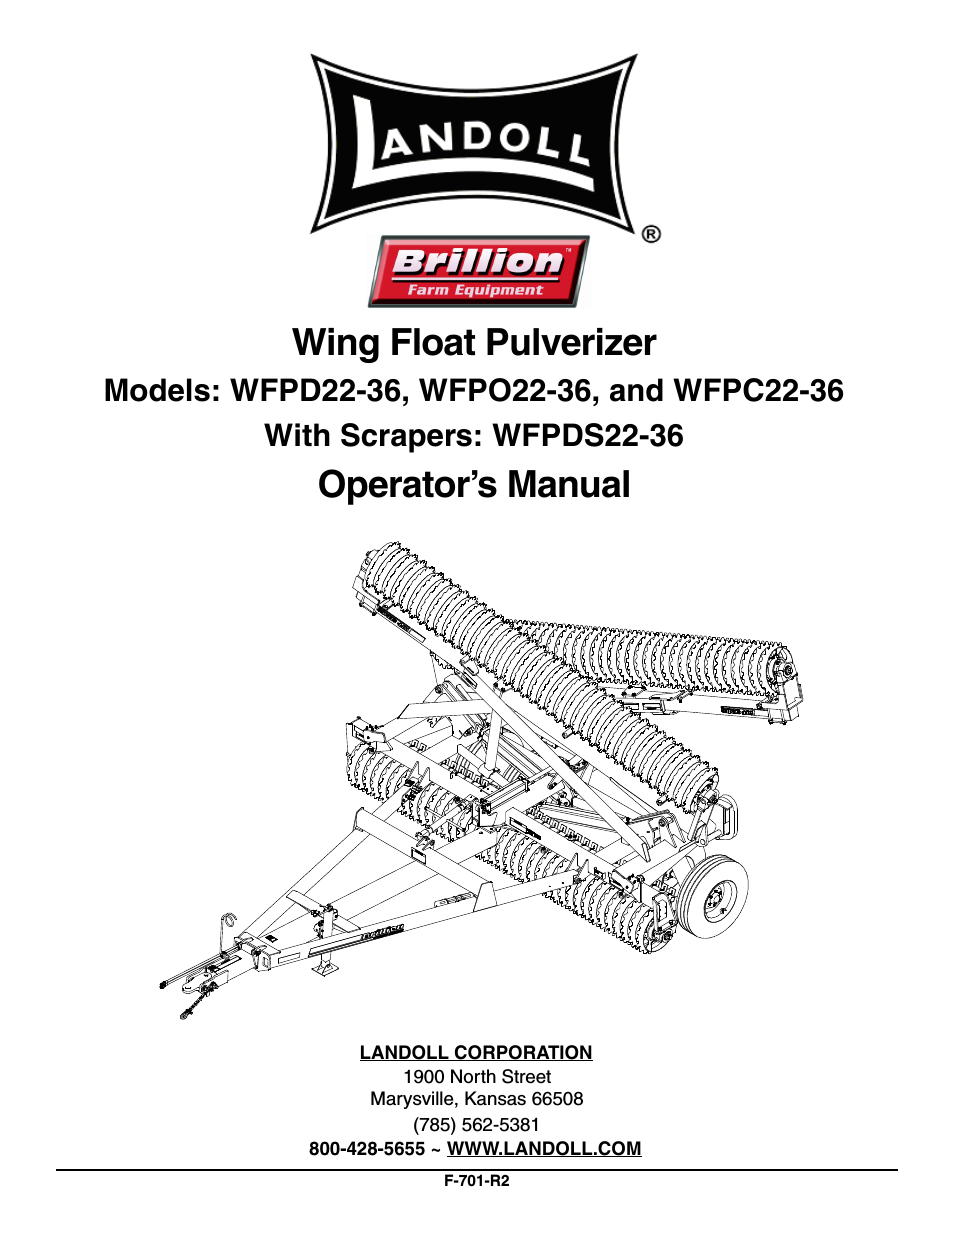 WFPD22-36 Wing Float Pulverizer